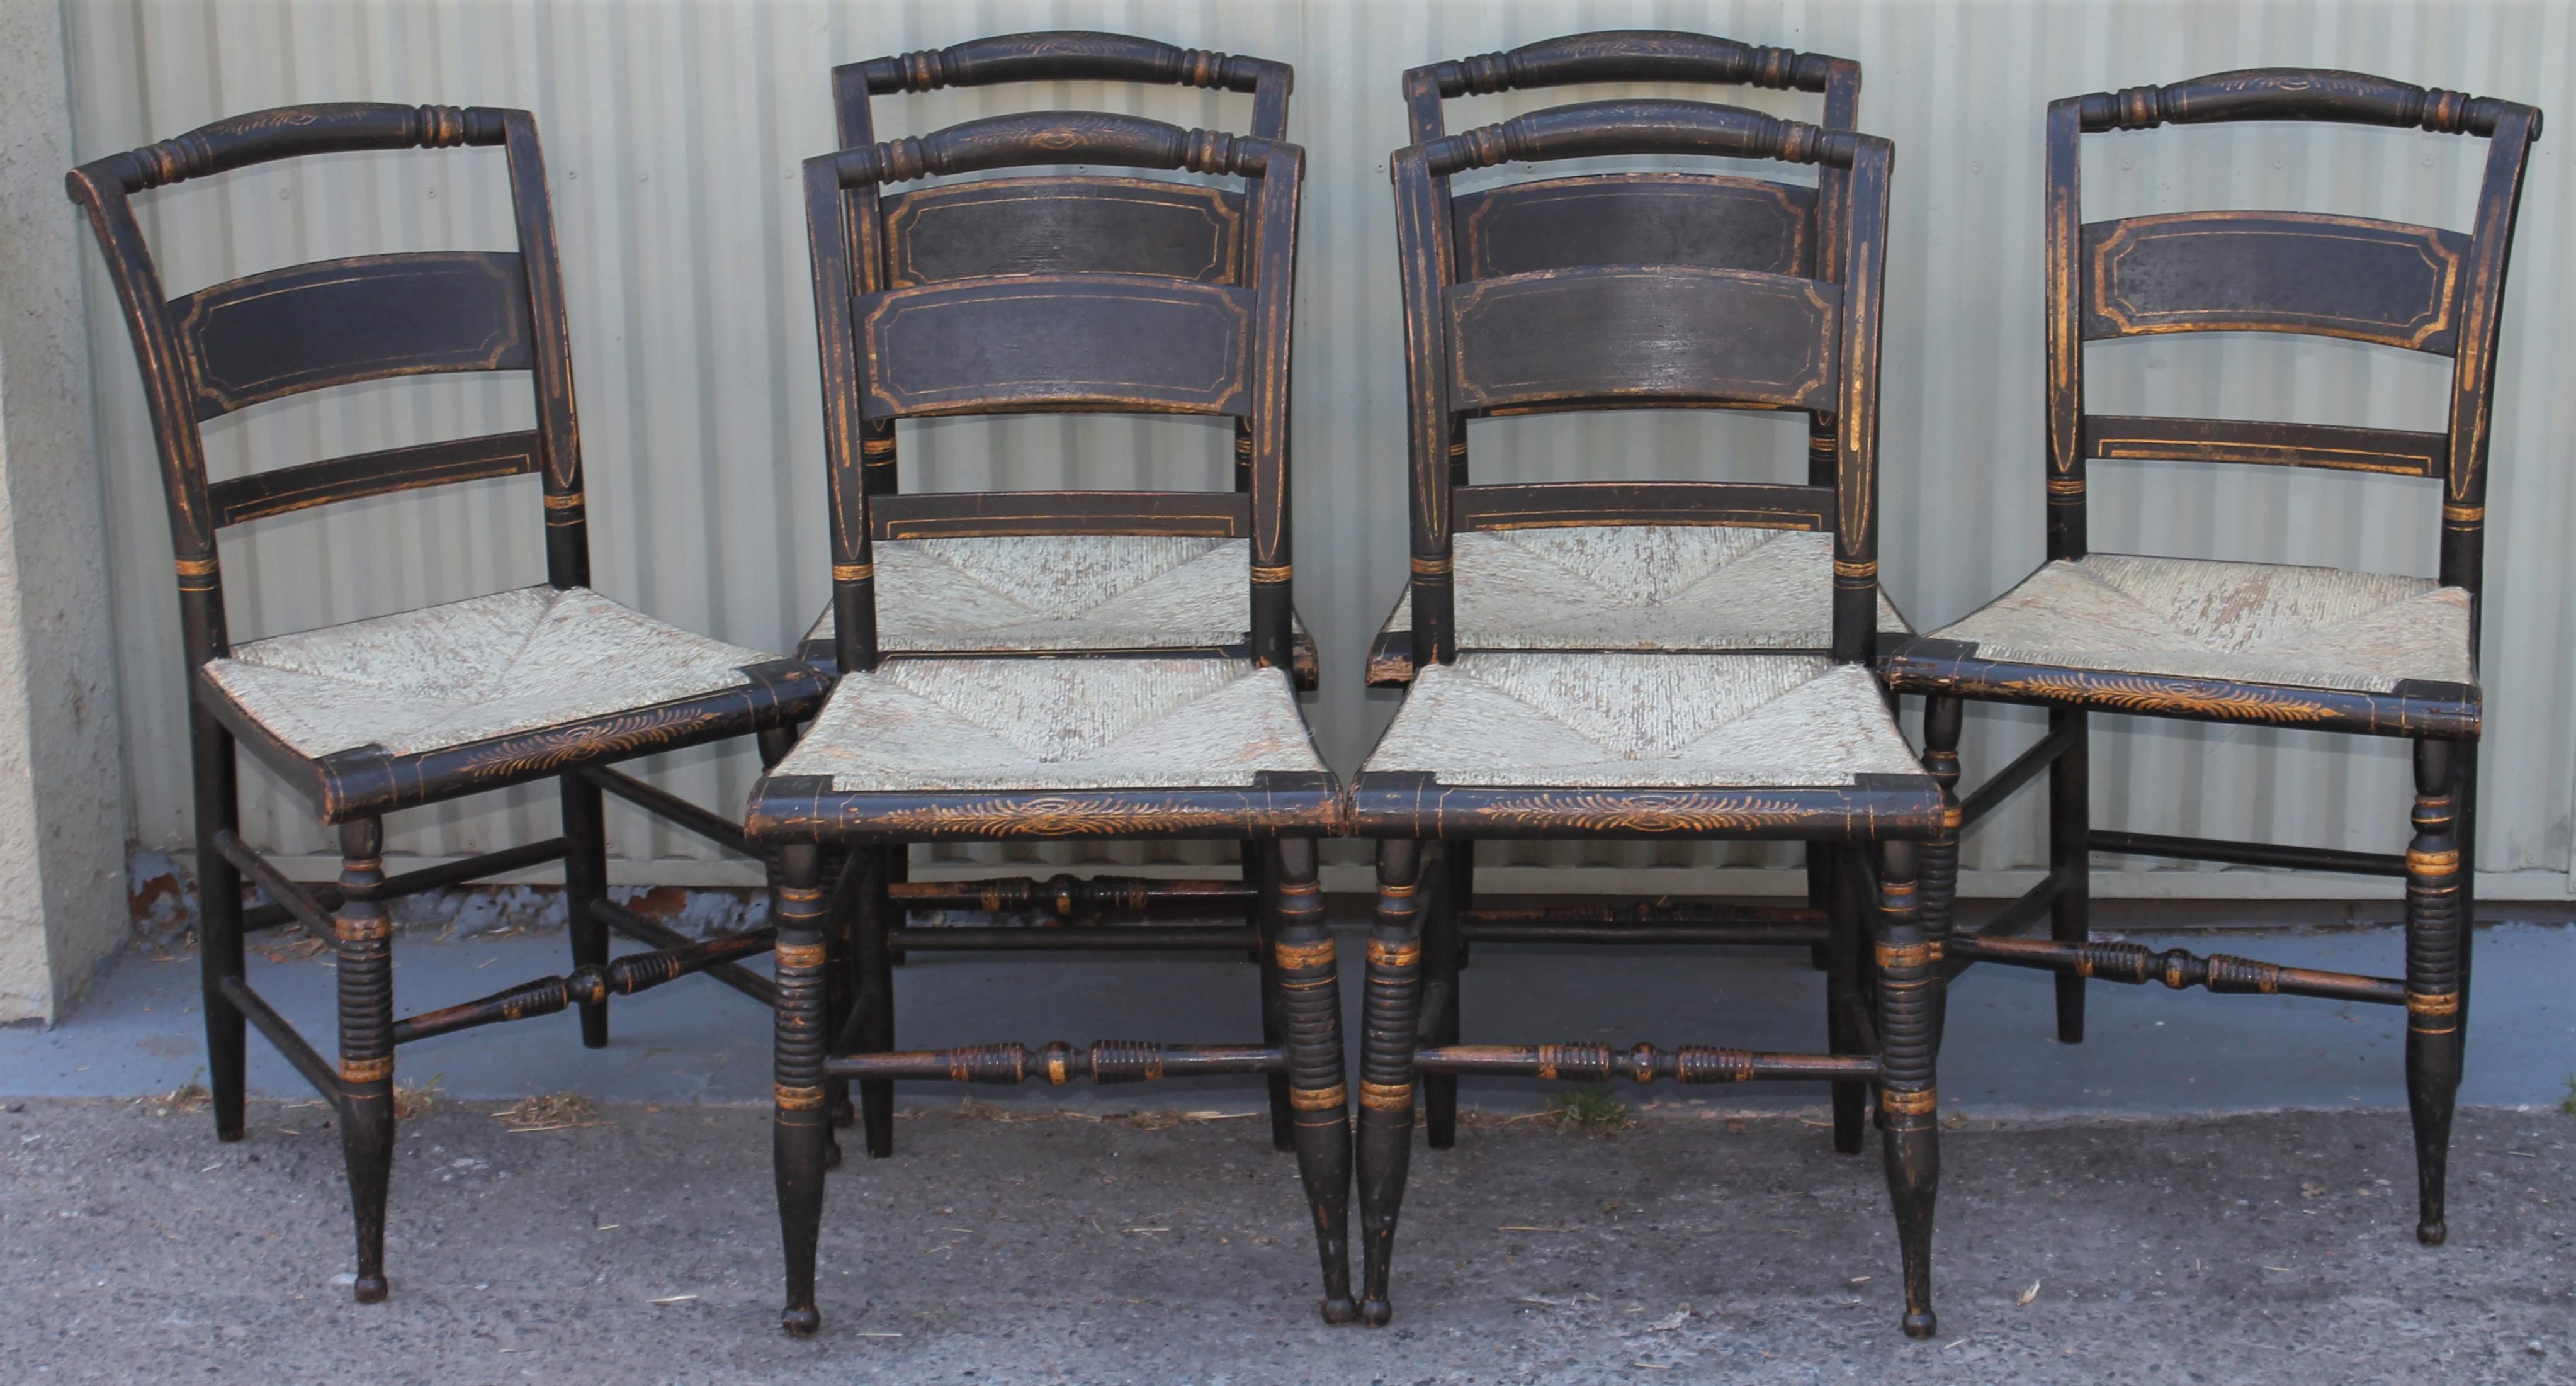 This fine set of six Hitchcock chairs in all original painted surface and very sturdy condition. The detail in the gilded stencil is pristine and white painted hand woven rush seats. The condition is very good and sturdy.